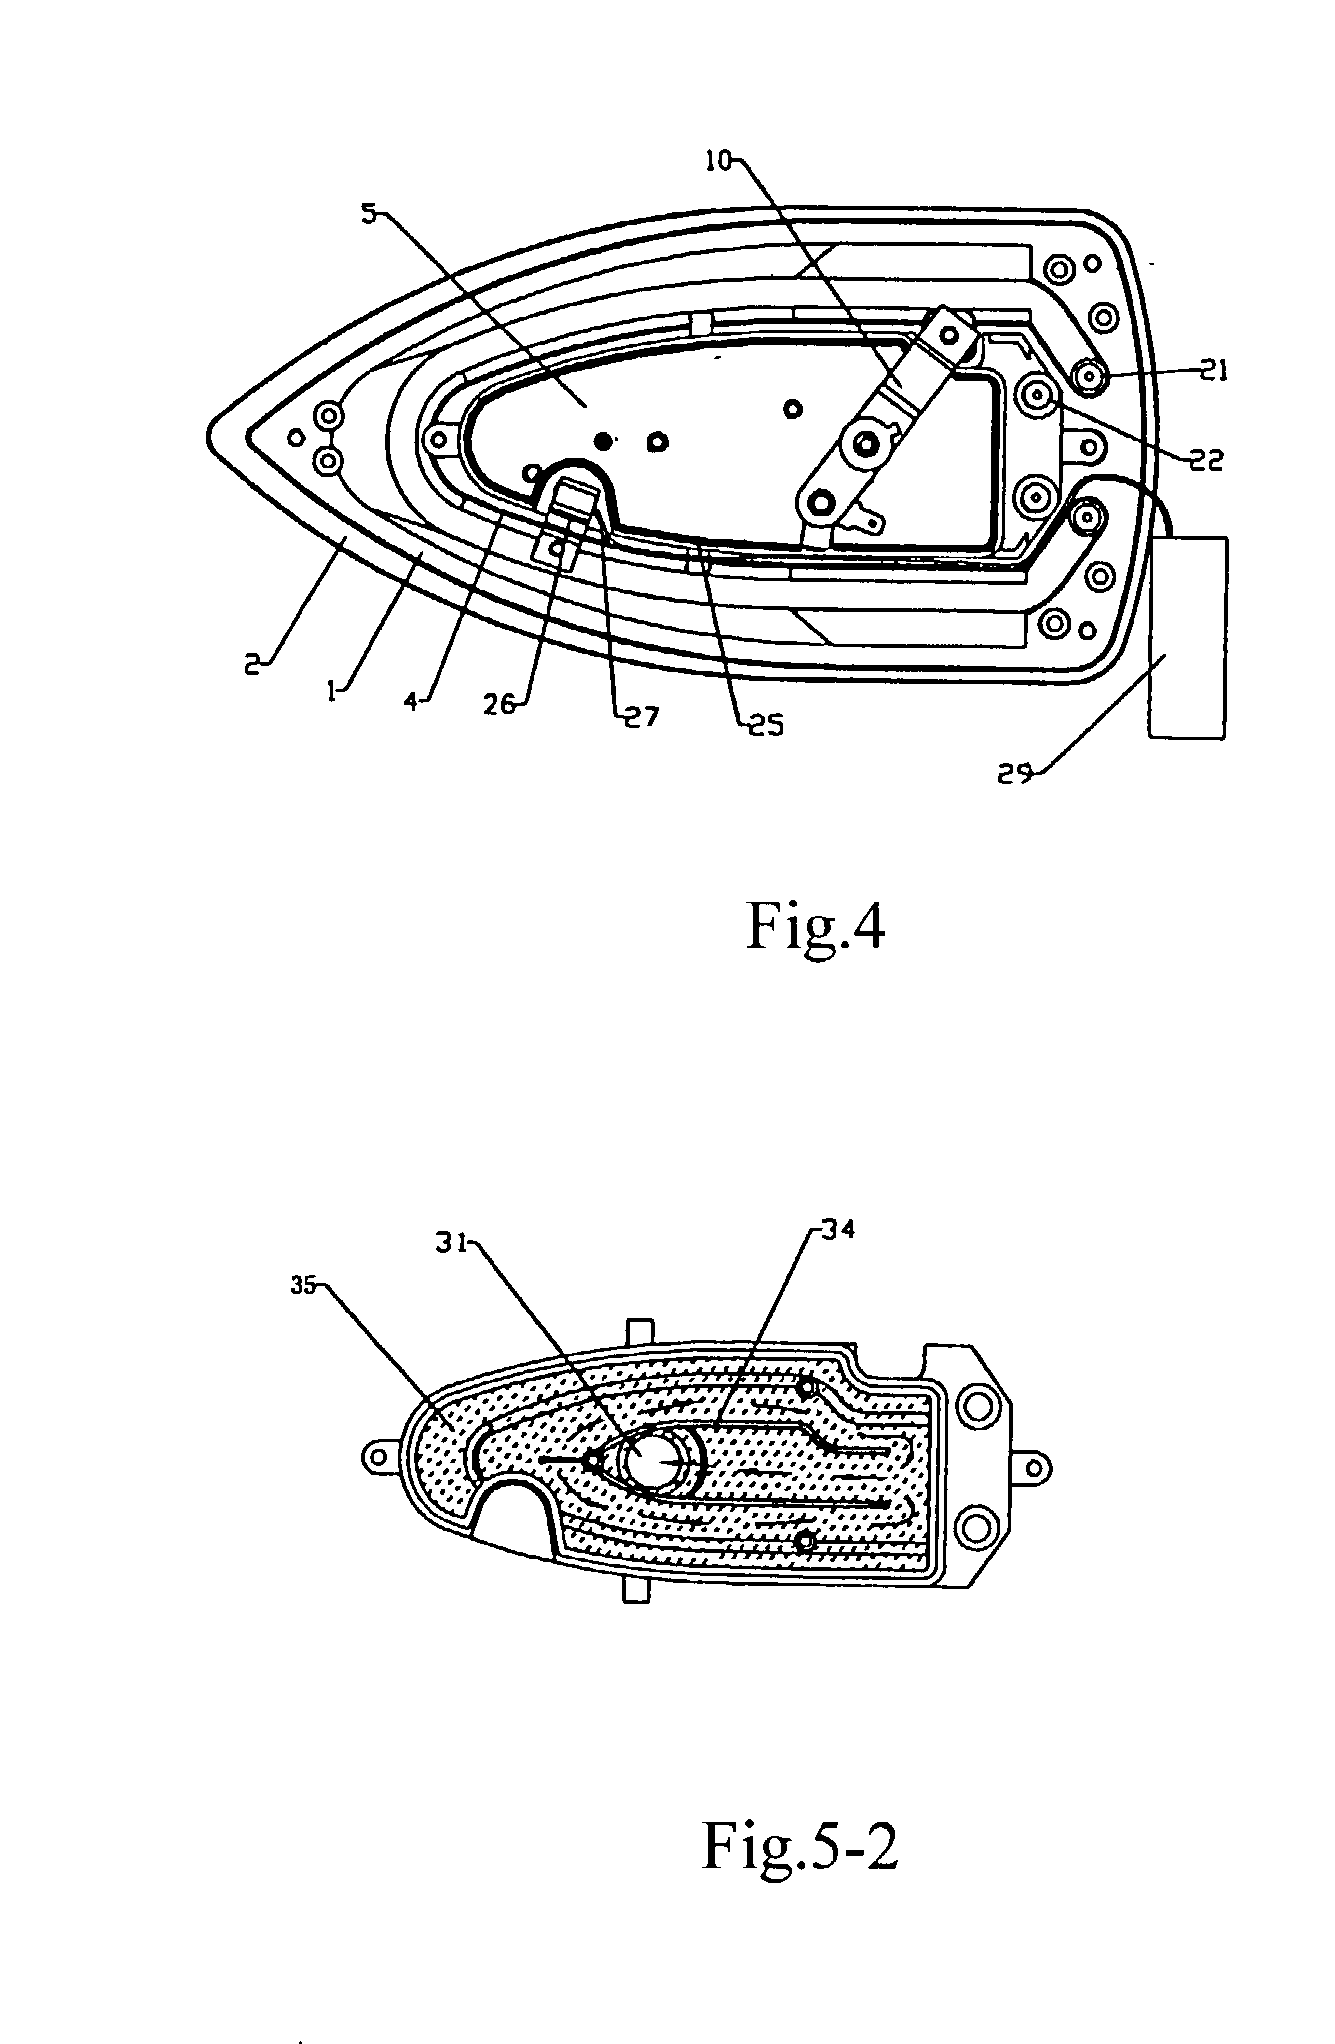 Kind of low-temperature steam electric iron